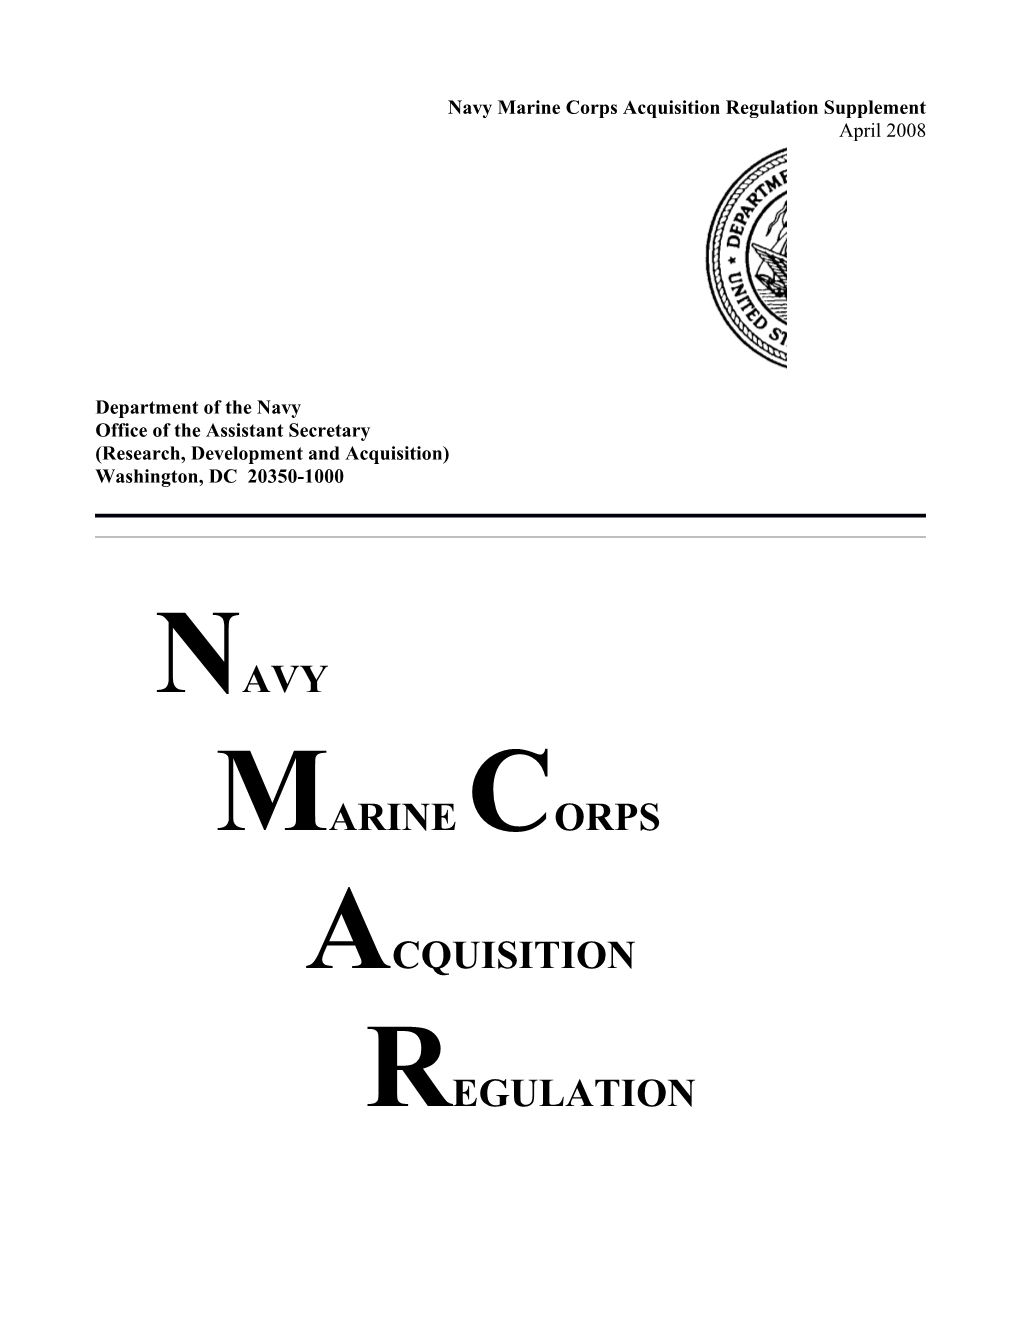 Change 08-16 to the Navy Marine Corps Acquisition Regulation Supplement (NMCARS) (A. H